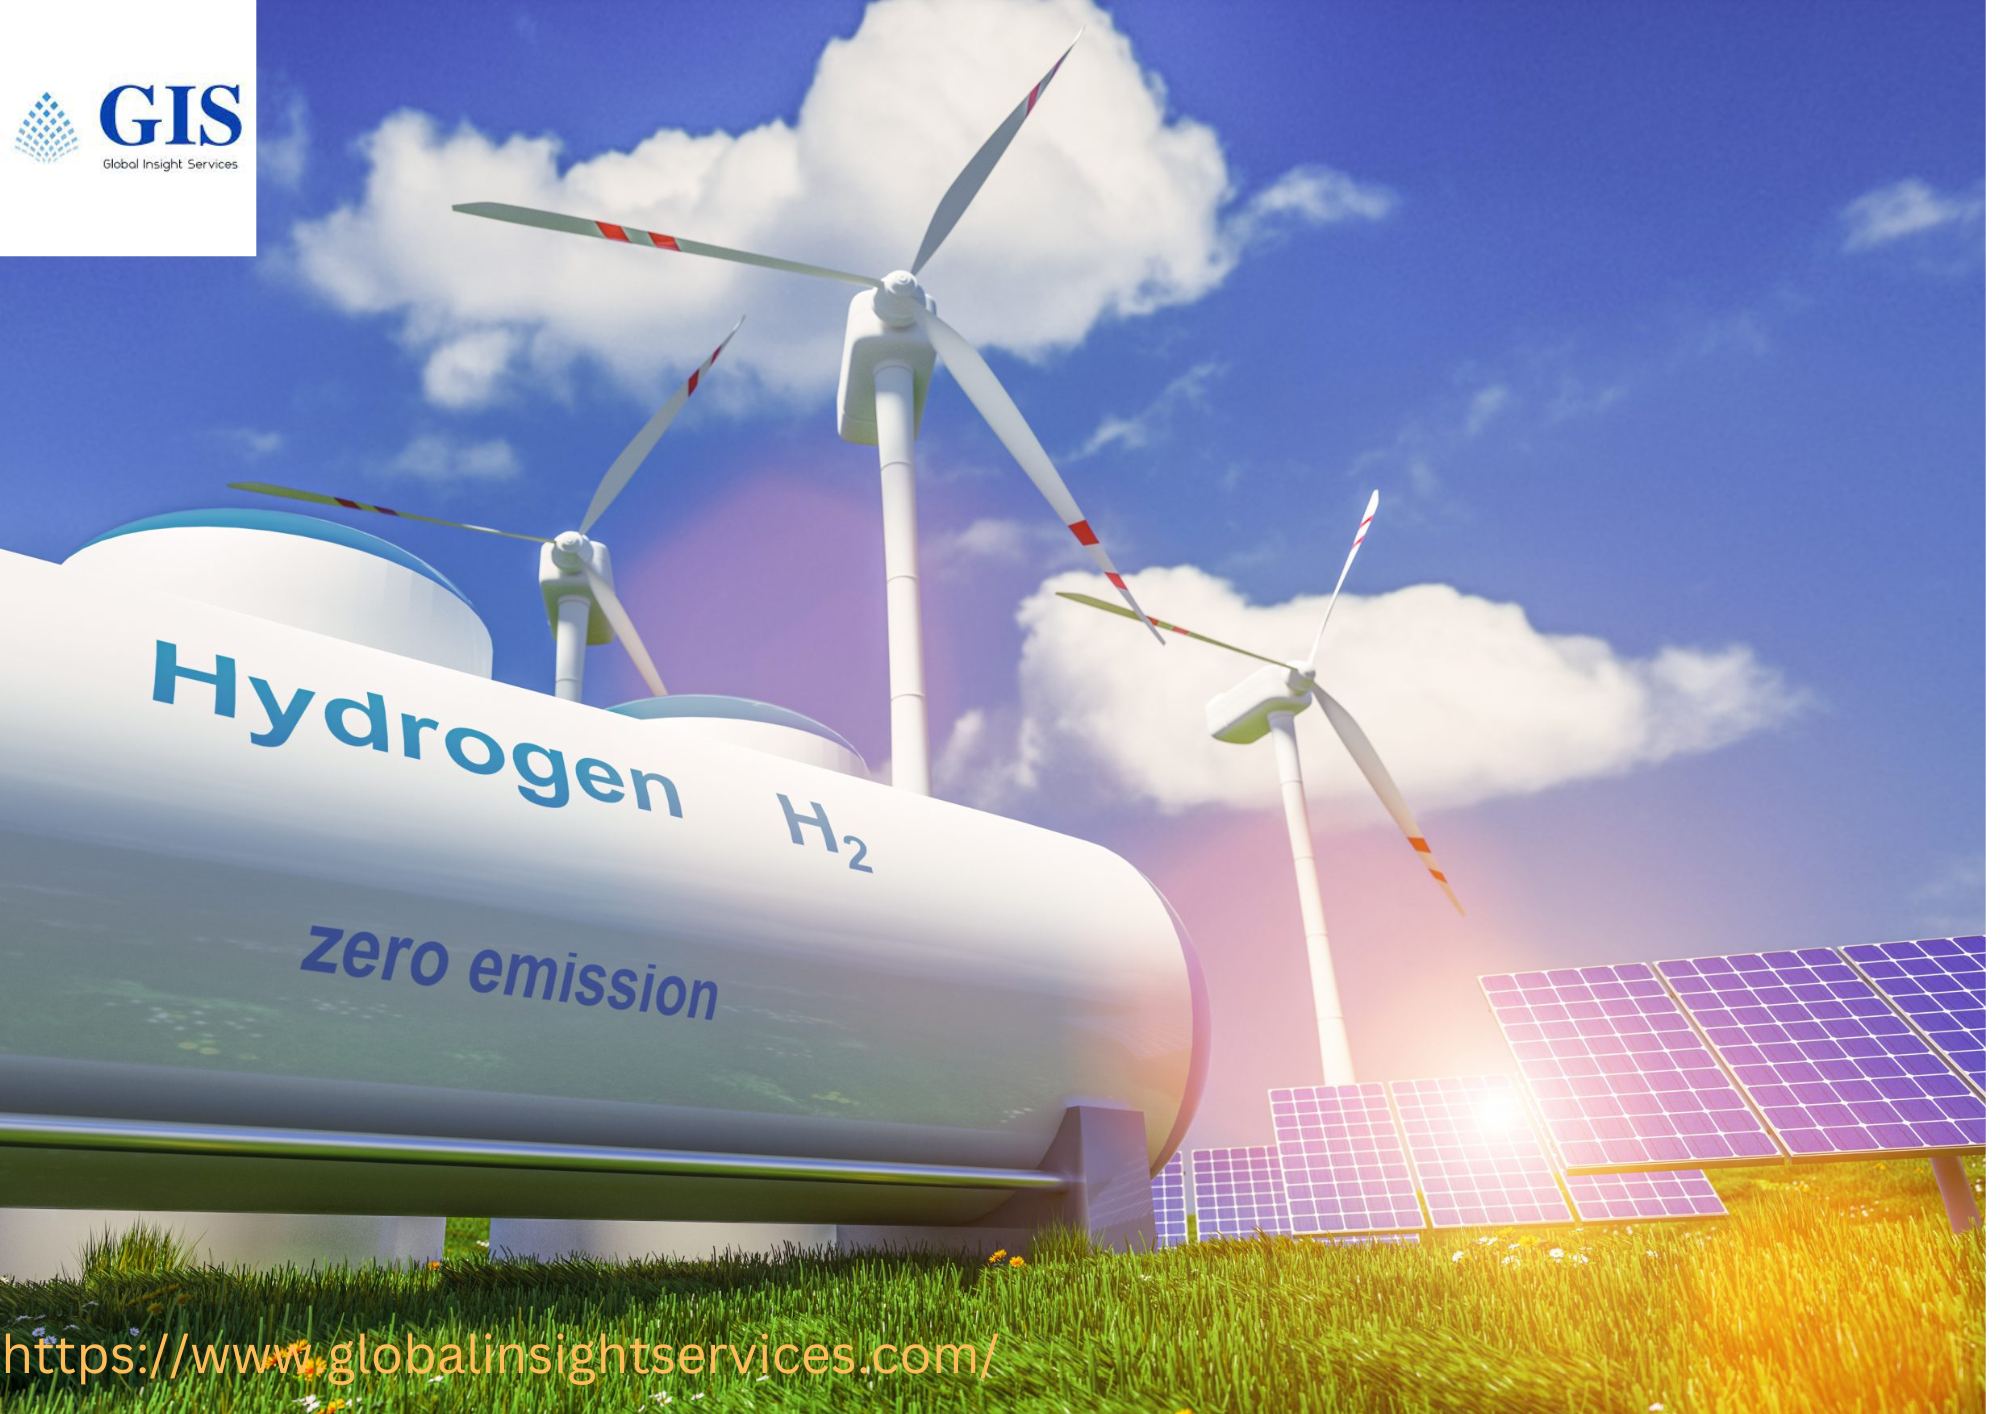 Hydrogen Generation Market Will Grow Due to the Need to Reduce Carbon Emissions and the Developments in Technology for Producing Hydrogen